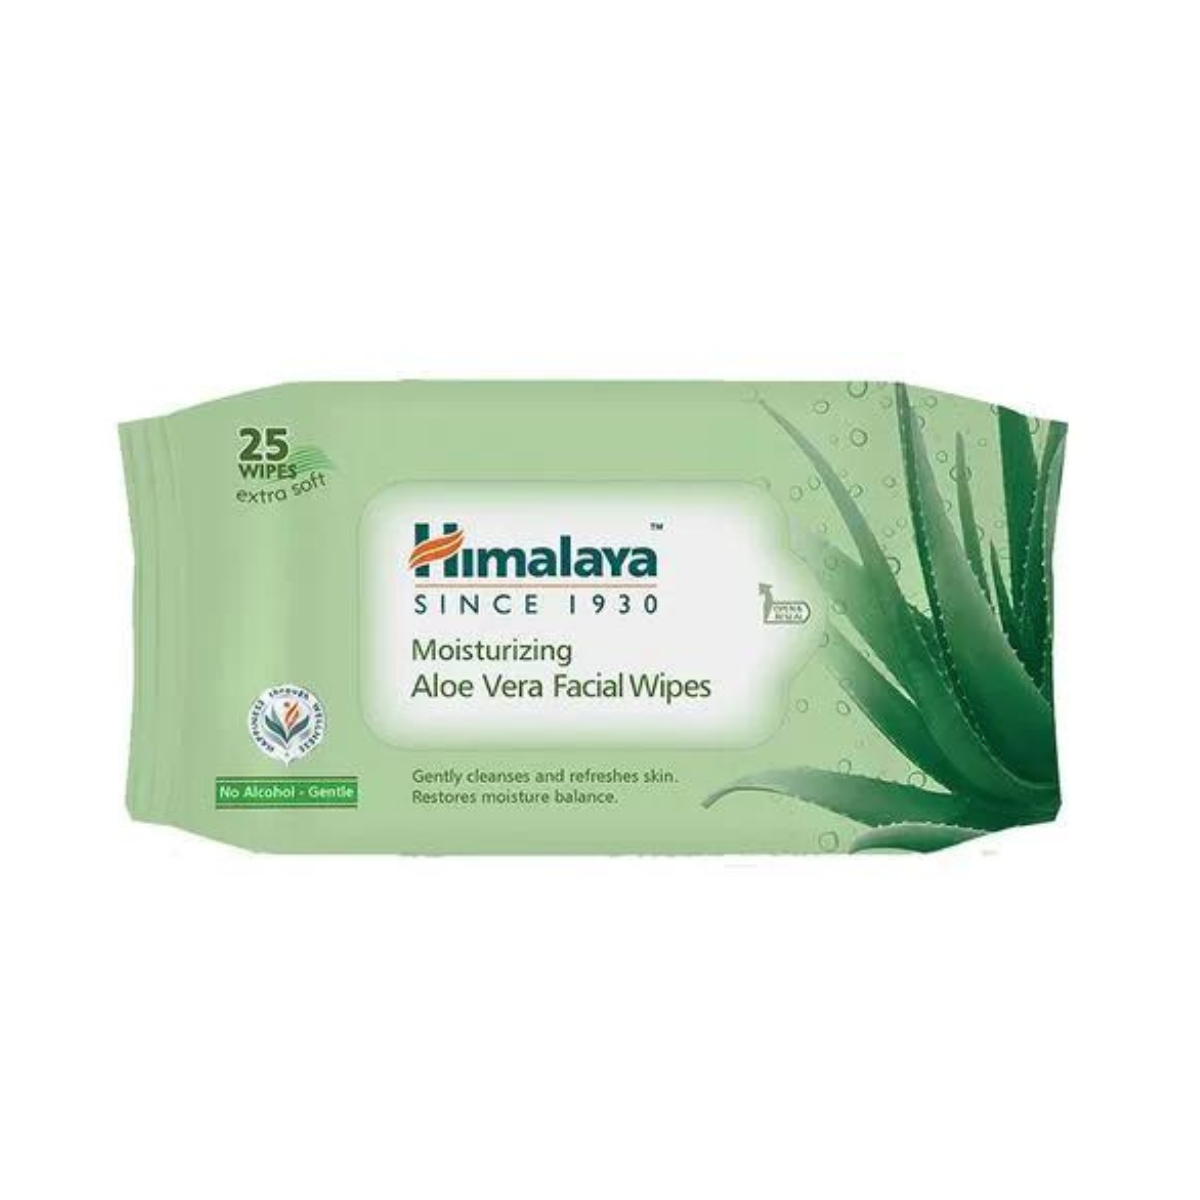 Himalaya Moisturizing Aloe Vera Facial Wipes - Gently Cleanses And Refreshes Skin - 25pcs Usable Sheets